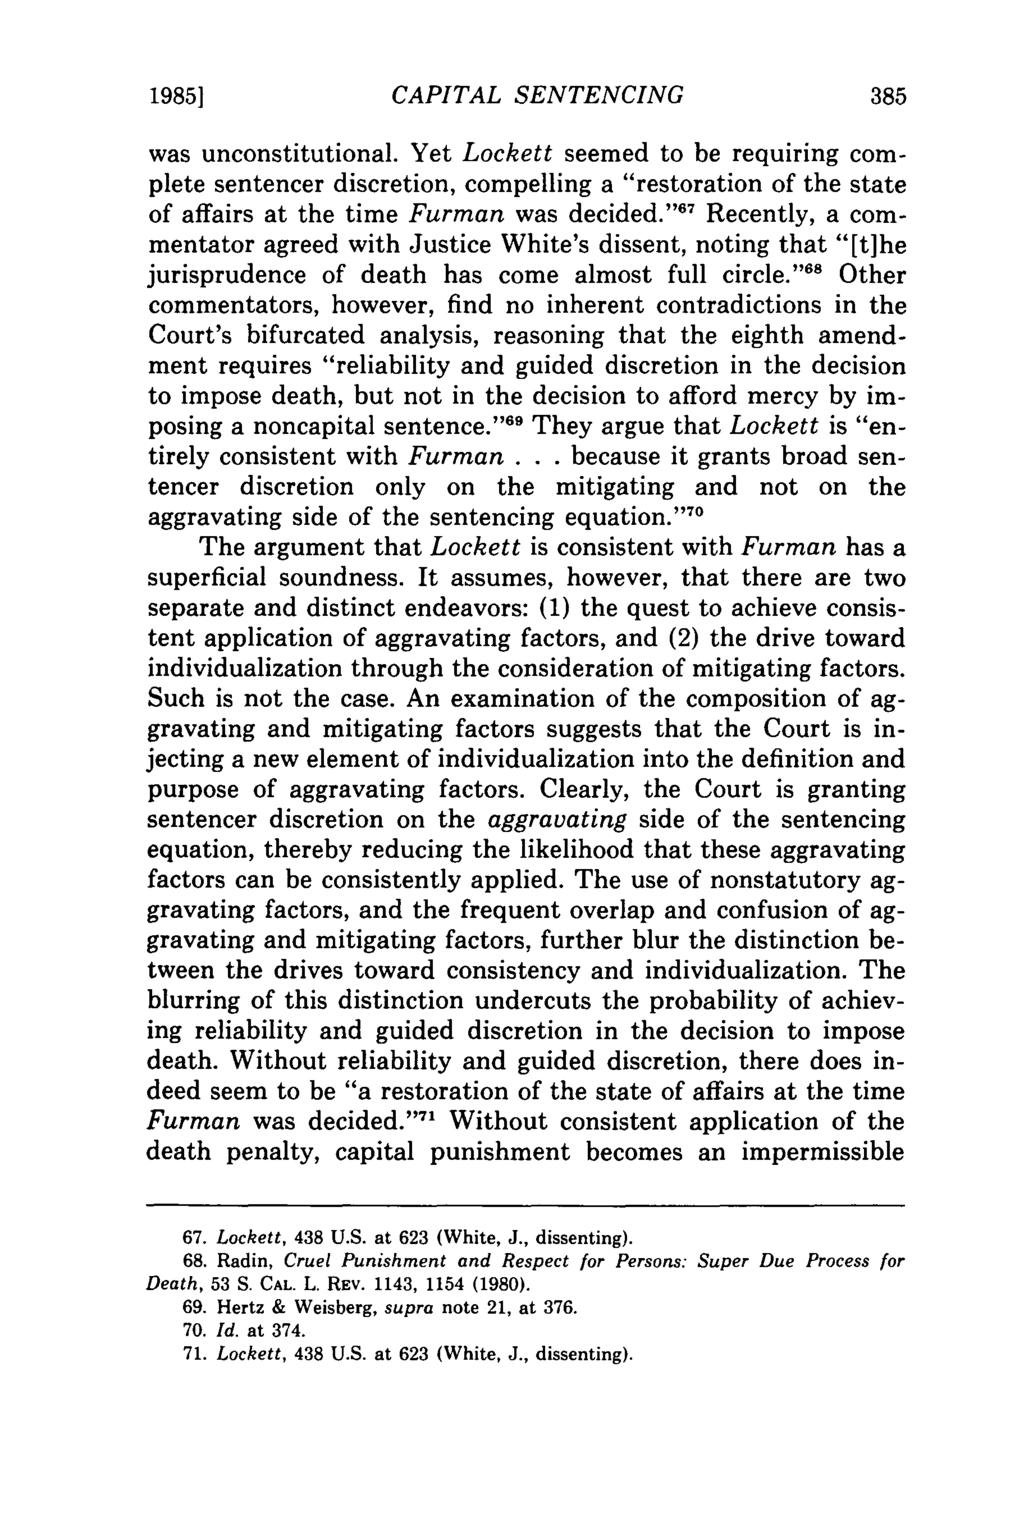 19851 CAPITAL SENTENCING was unconstitutional. Yet Lockett seemed to be requiring complete sentencer discretion, compelling a "restoration of the state of affairs at the time Furman was decided.